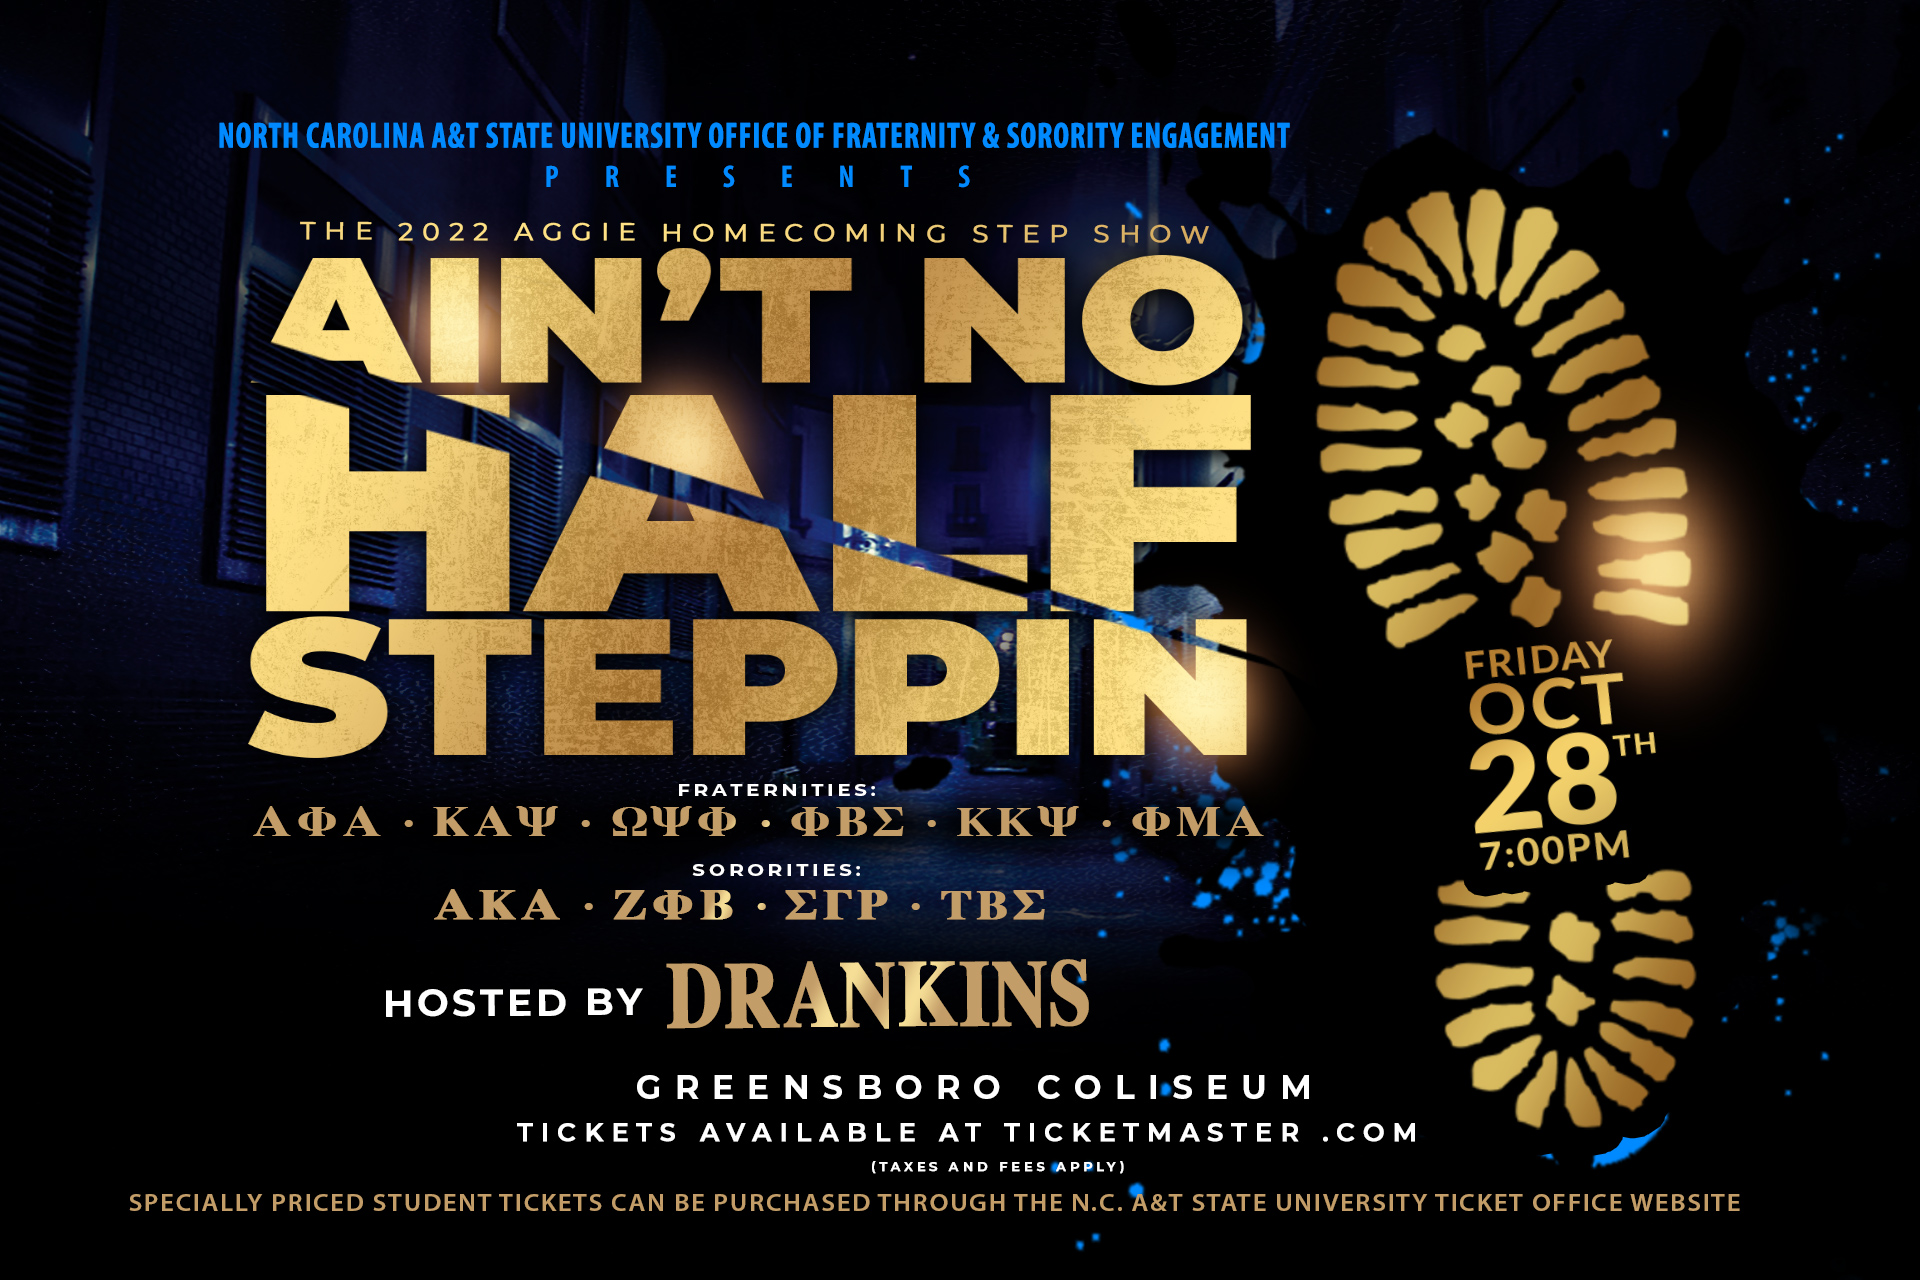 N.C. A&T 2022 Homecoming Step Show